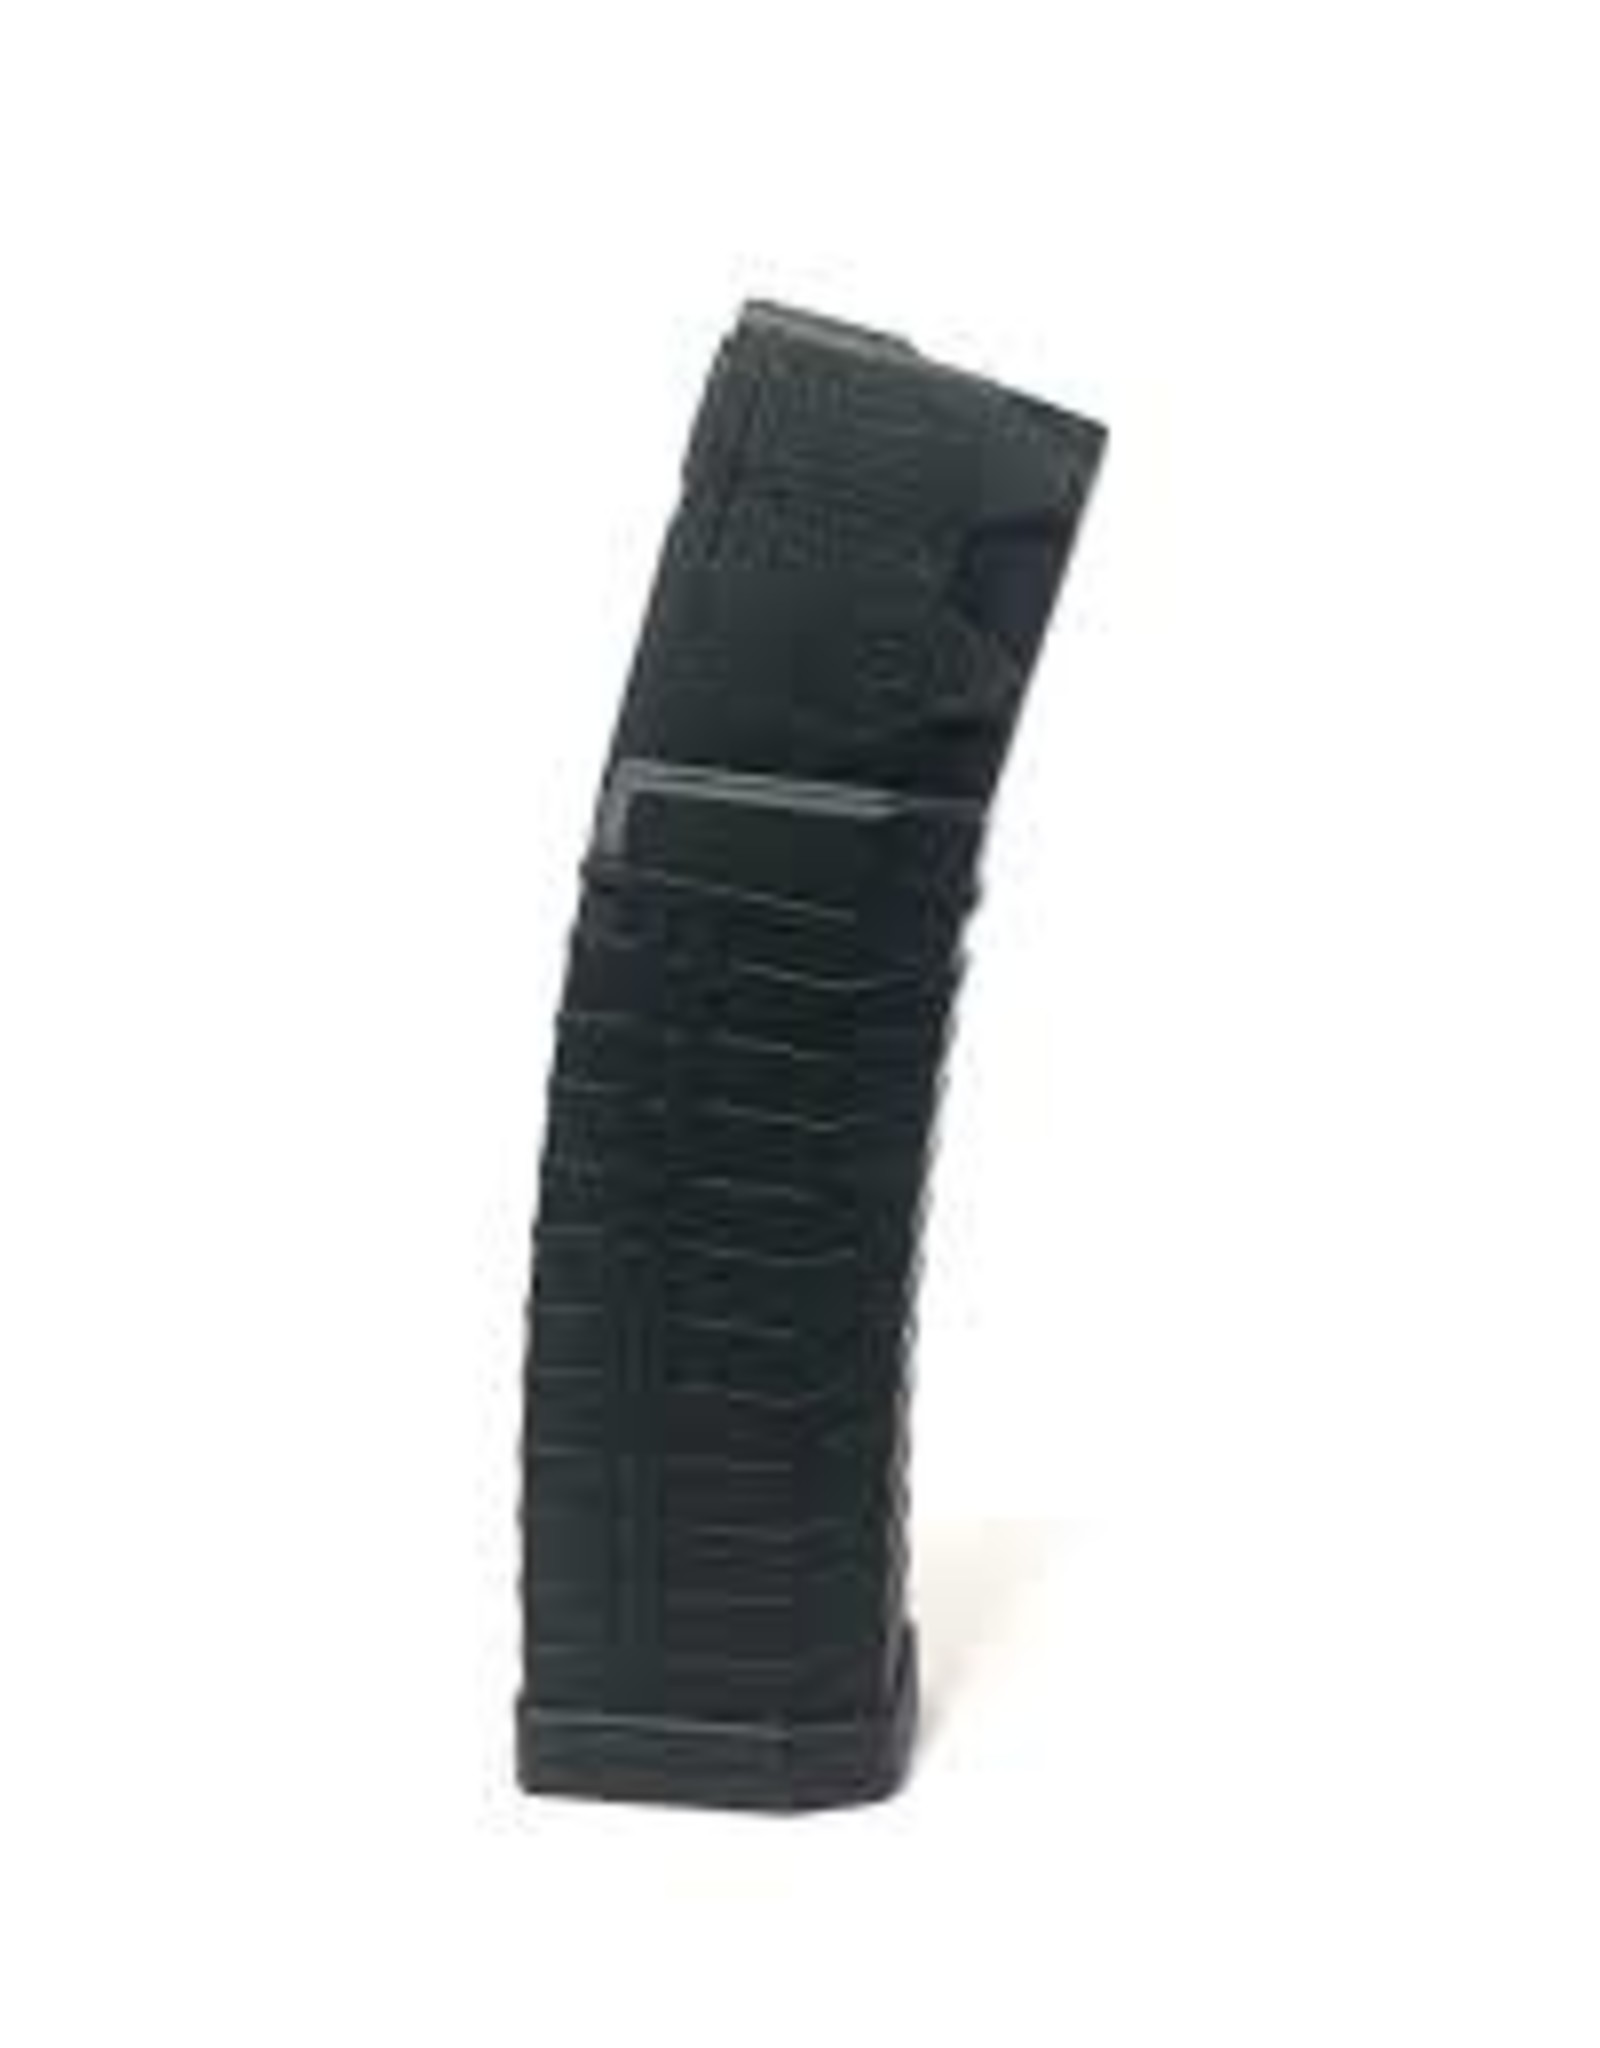 American Tactical American Tactical S60 AR 60 Round Magazine